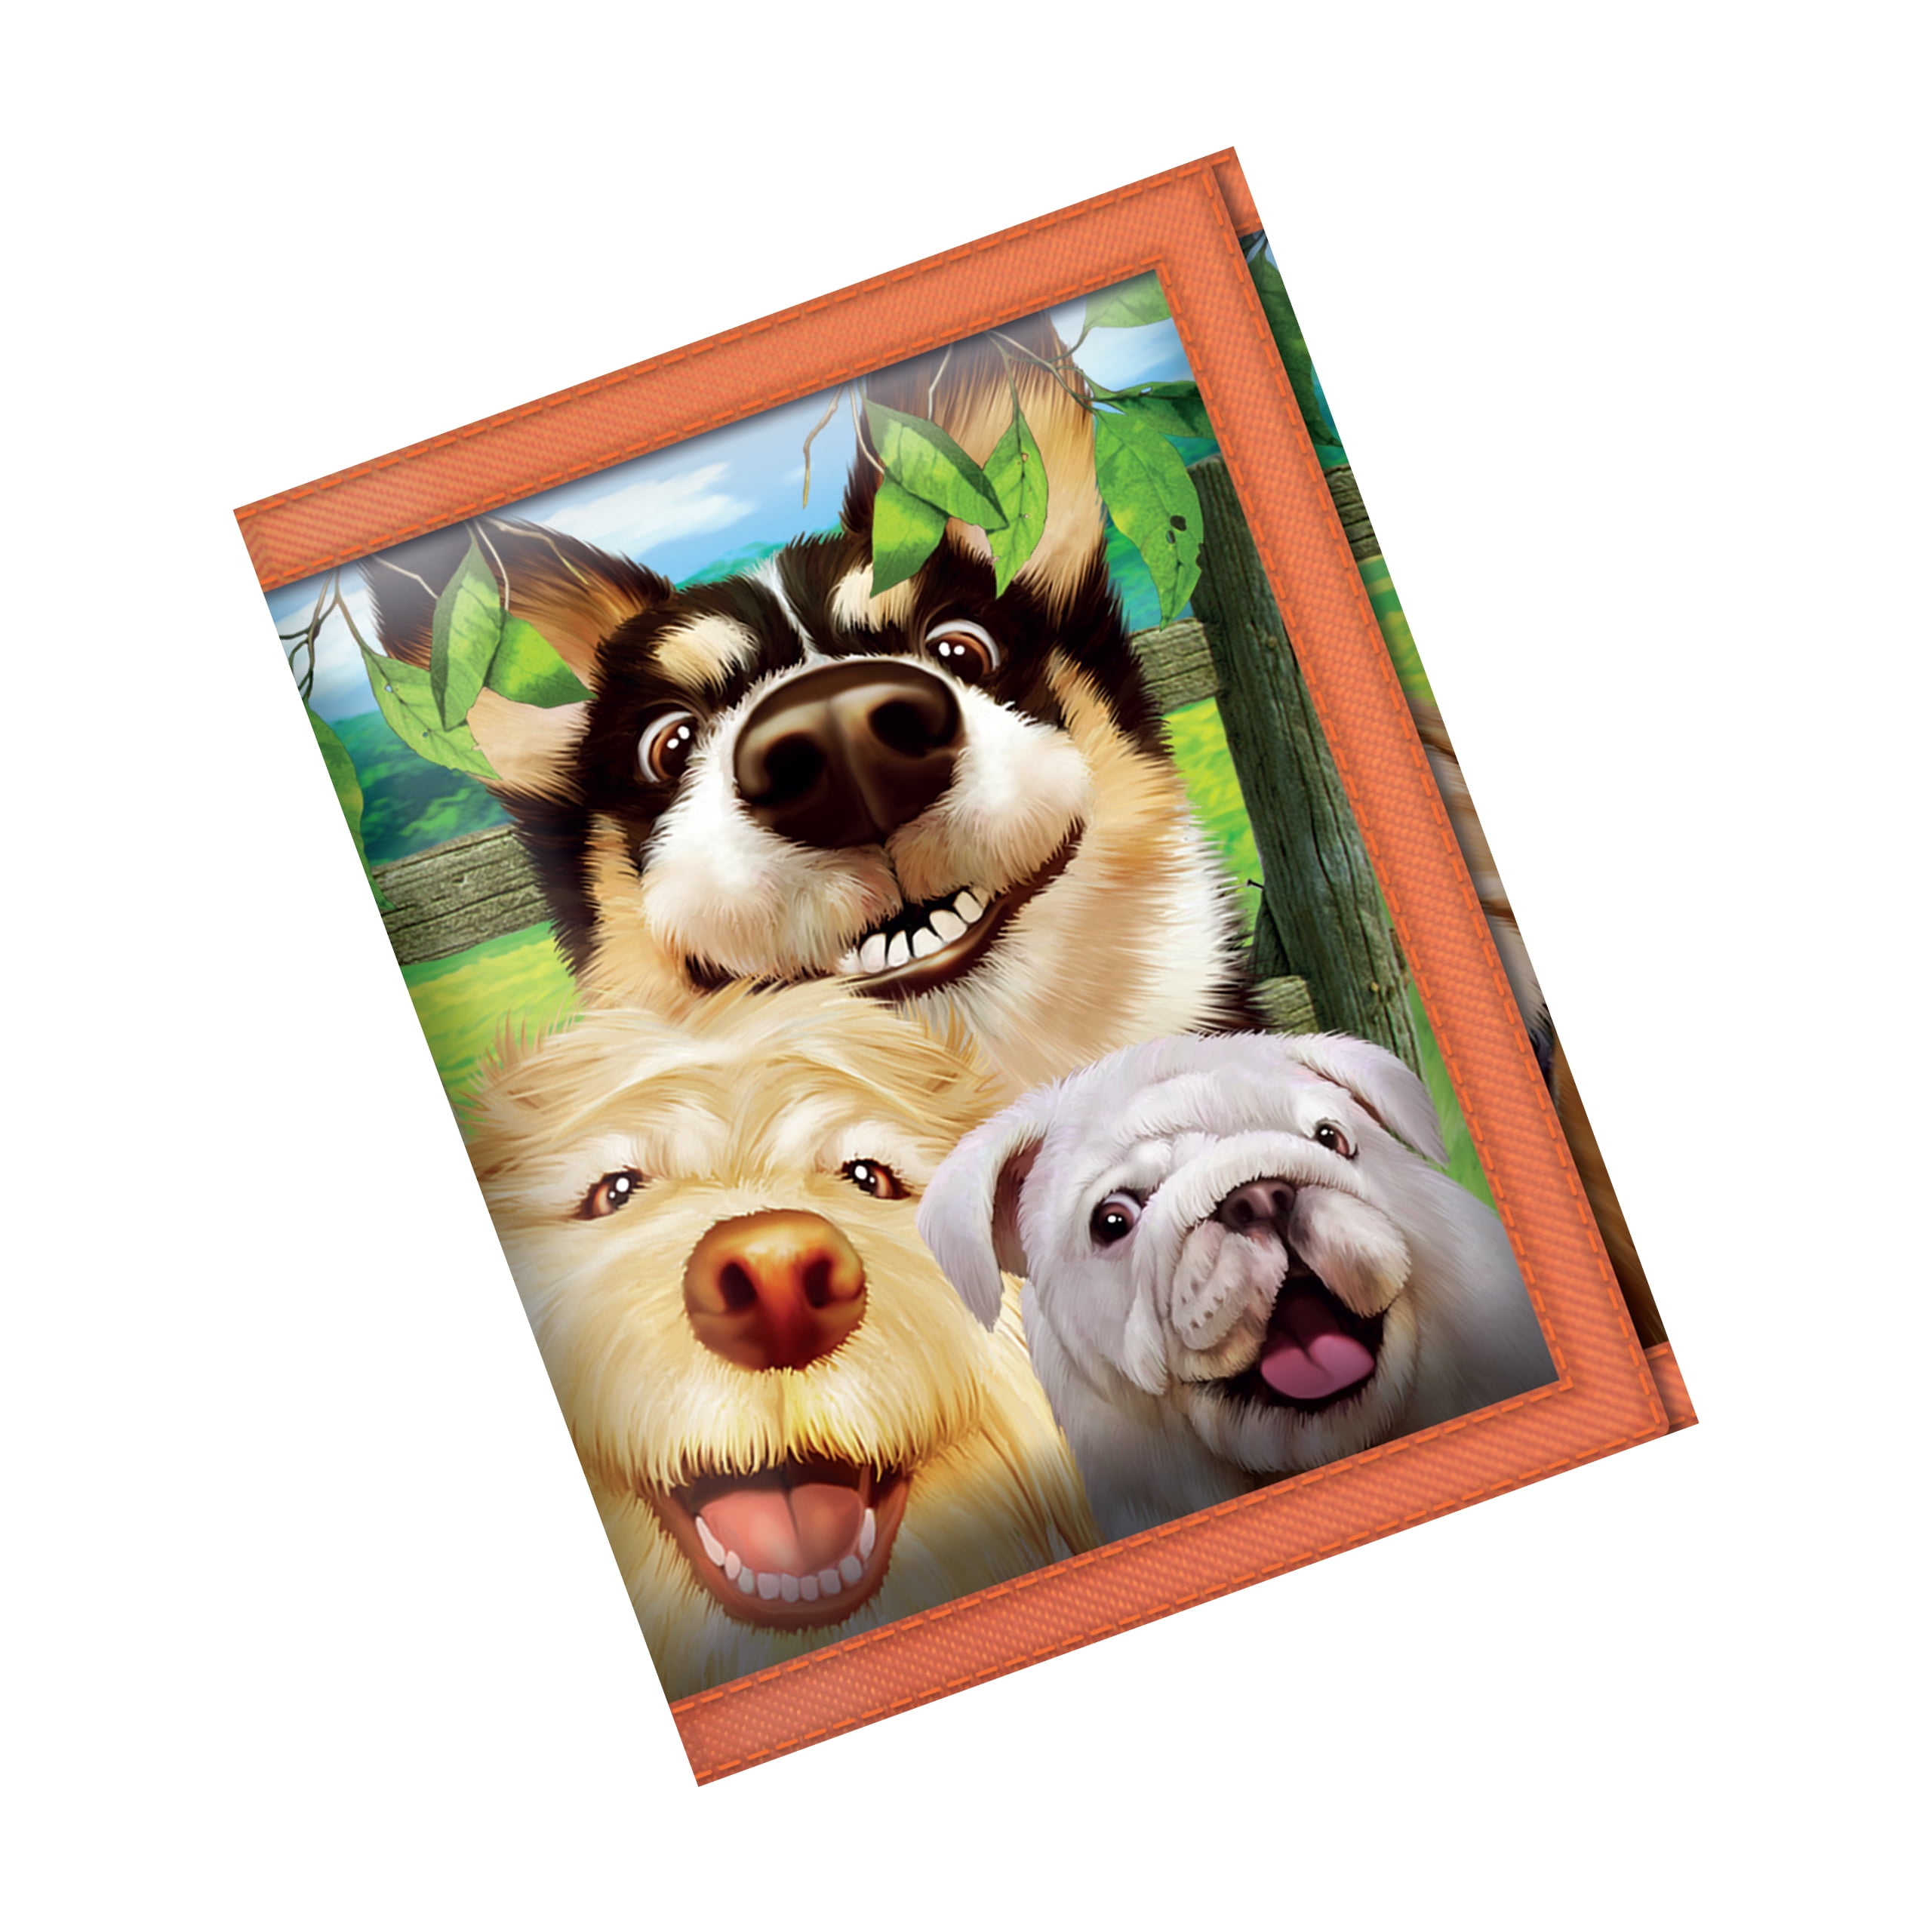 Canine Selfie from Deluxebase A Dog Bookmark with lenticular 3D Artwork Licensed from Renowned Artist Michael Searle 3D LiveLife Bookmark